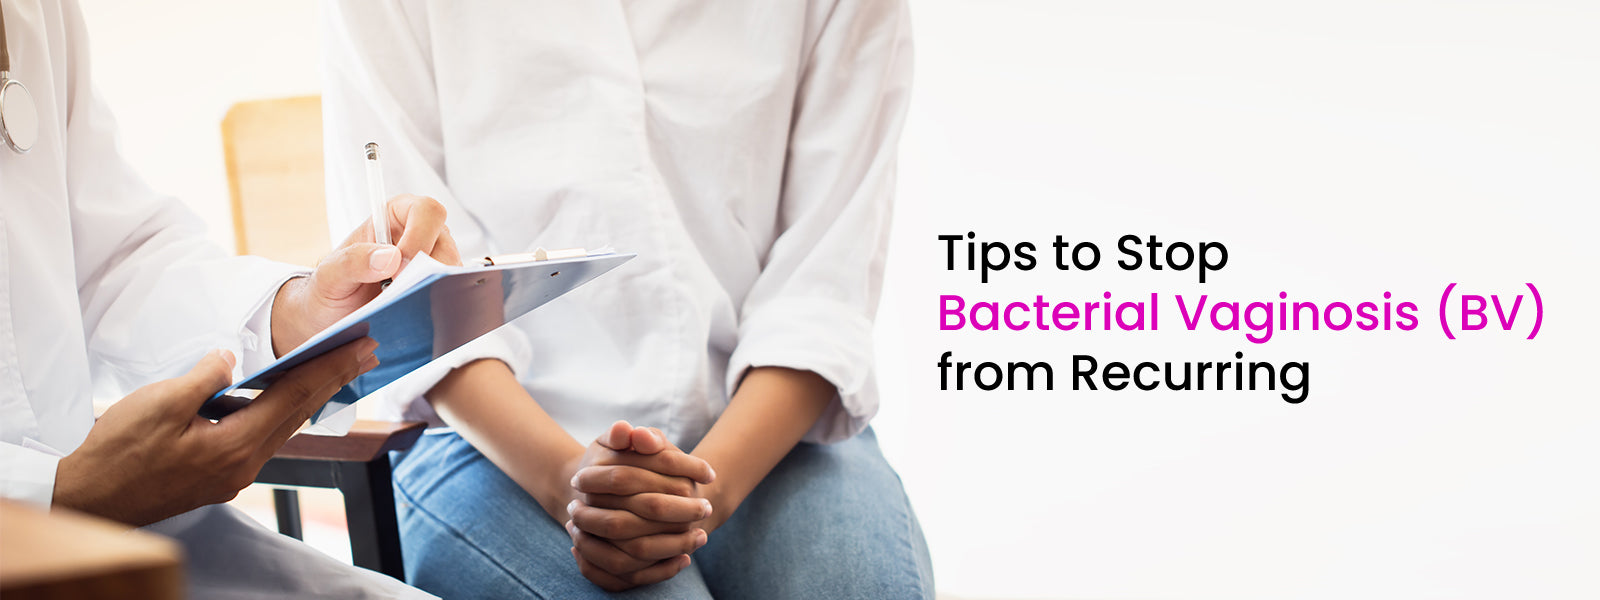 Tips to Stop Bacterial Vaginosis (BV) from Recurring